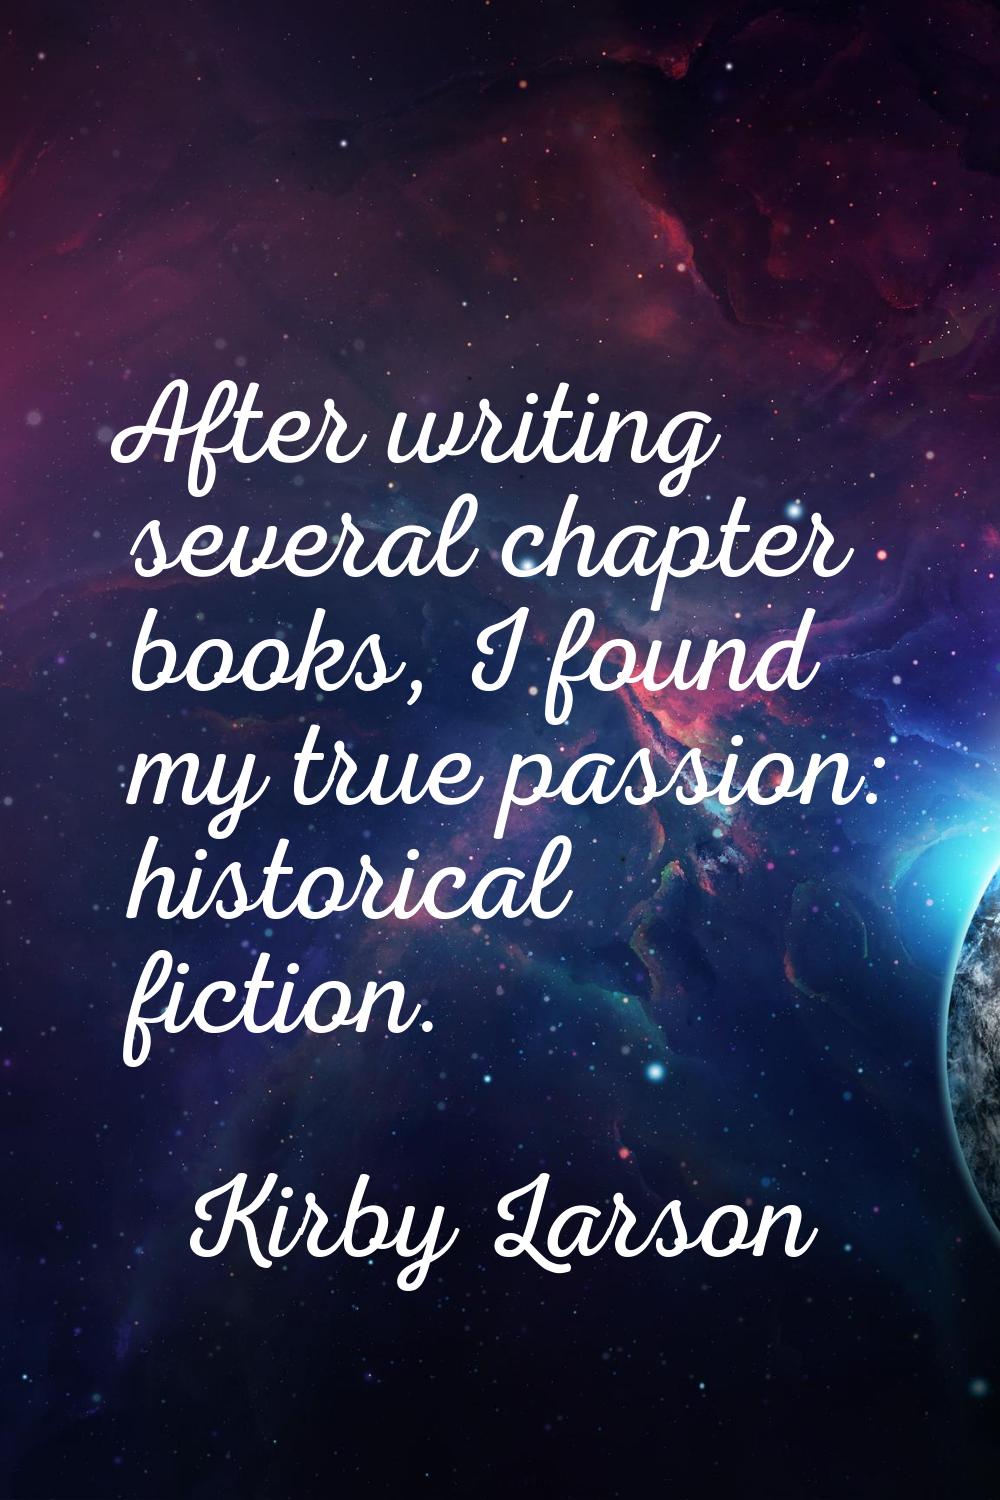 After writing several chapter books, I found my true passion: historical fiction.